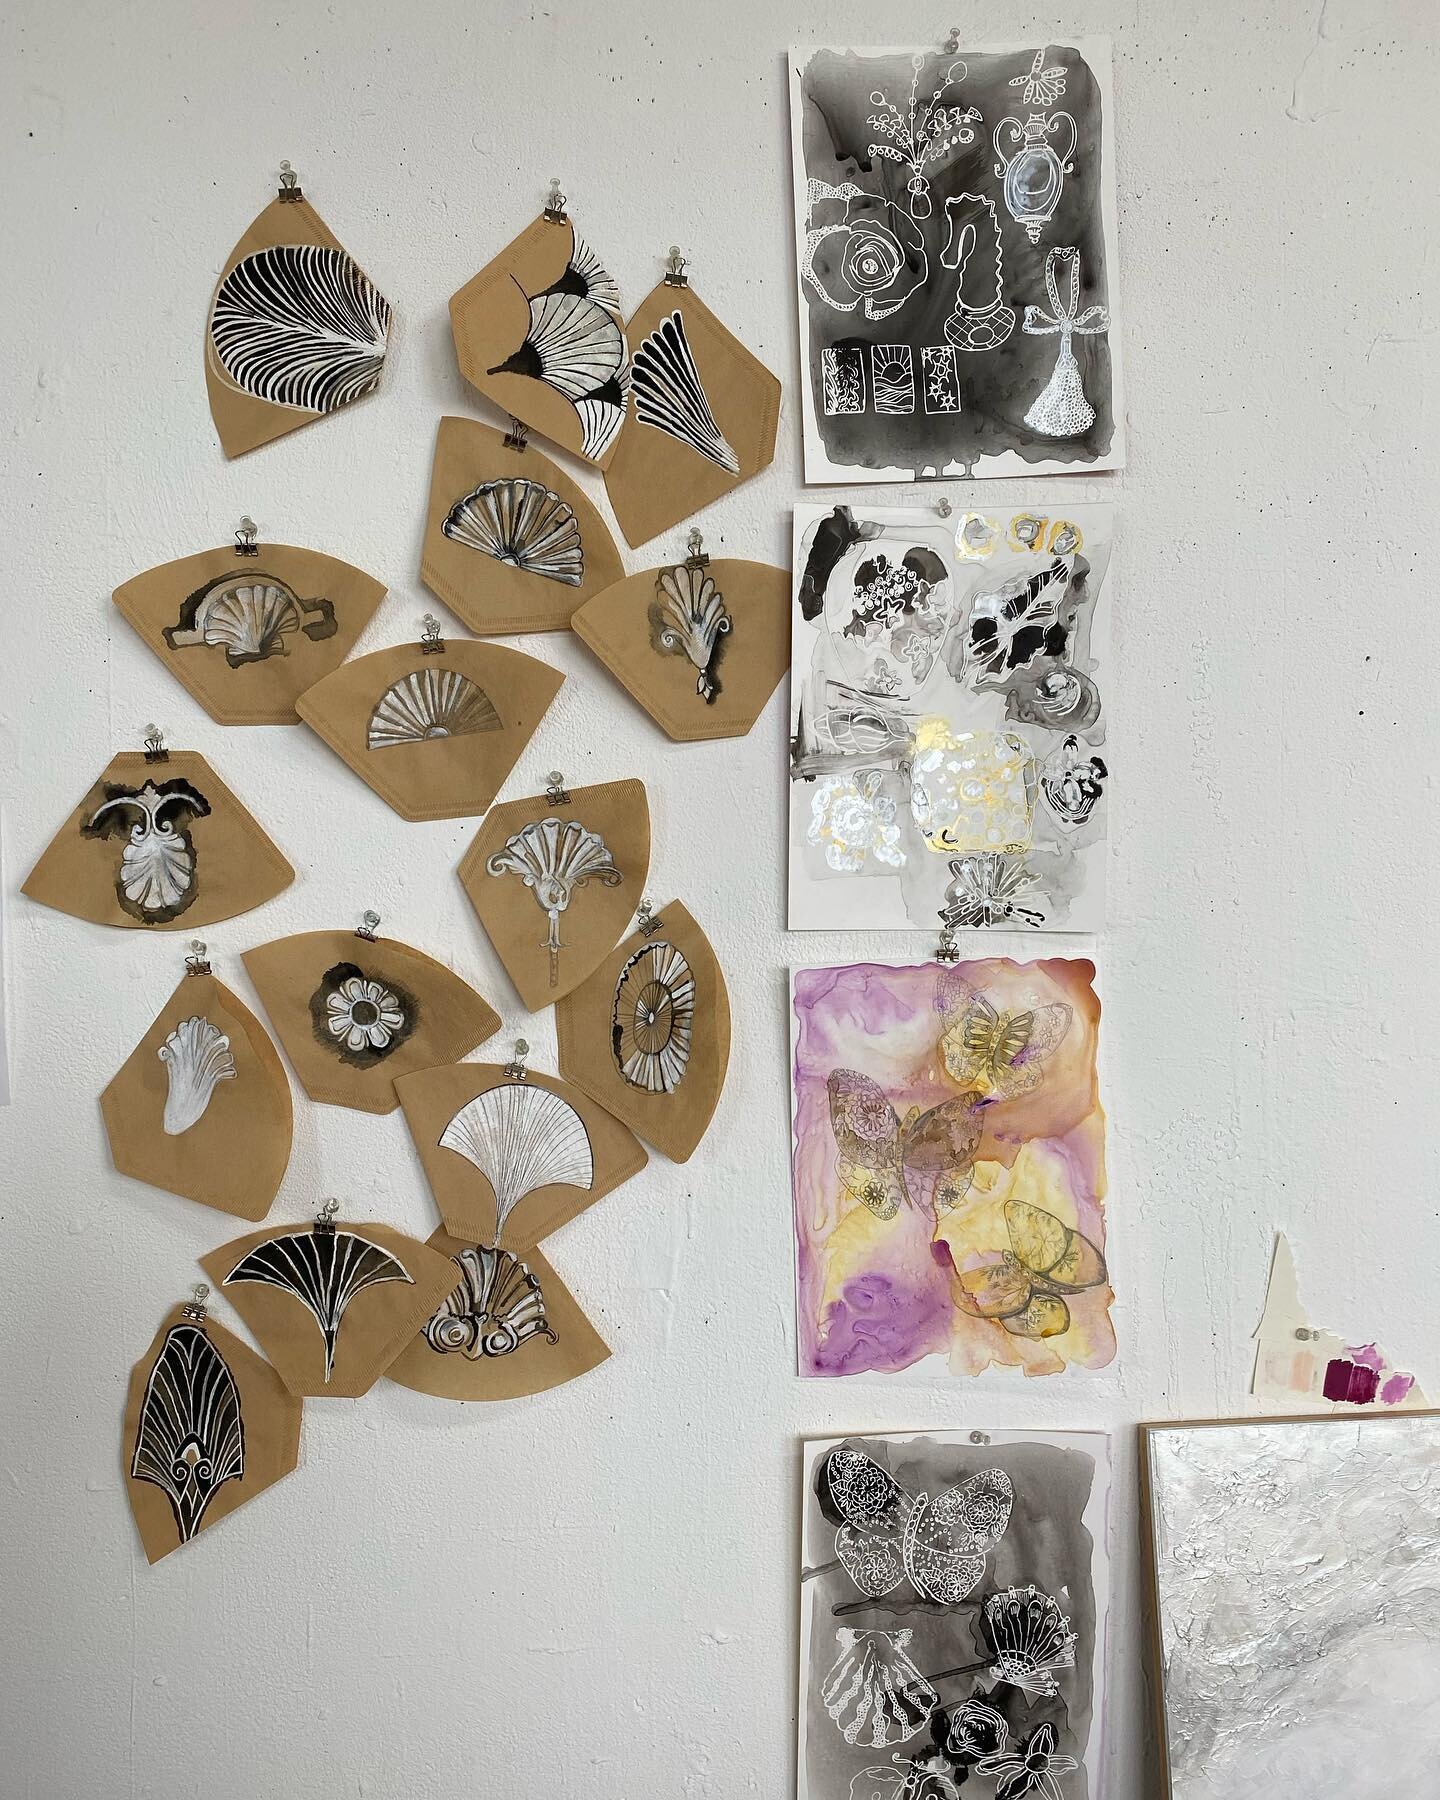 Projects in progress around the studio this week&hellip;
1. Warm ups with ink on coffee filters ☕️
2. New still life collage on panel in progress 🏺
3. Acrylic paint peels in a custom color scheme for a commission.

#pgh #pghcreative #pghartist #pitt